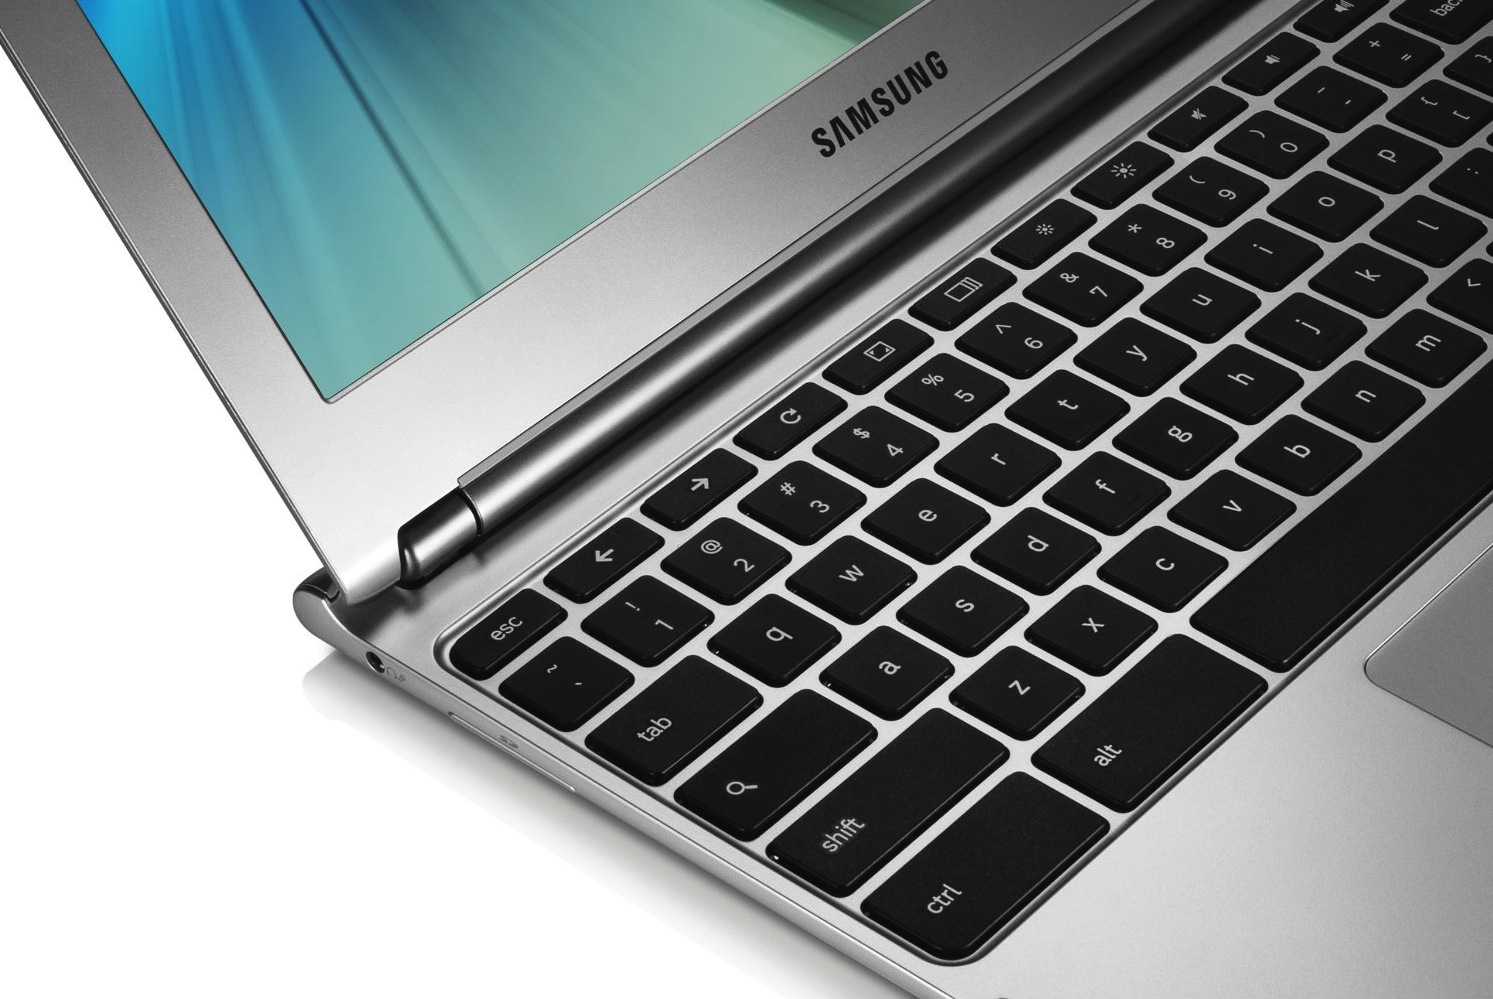 Is $249 the Right Price for the new Samsung Chromebook?